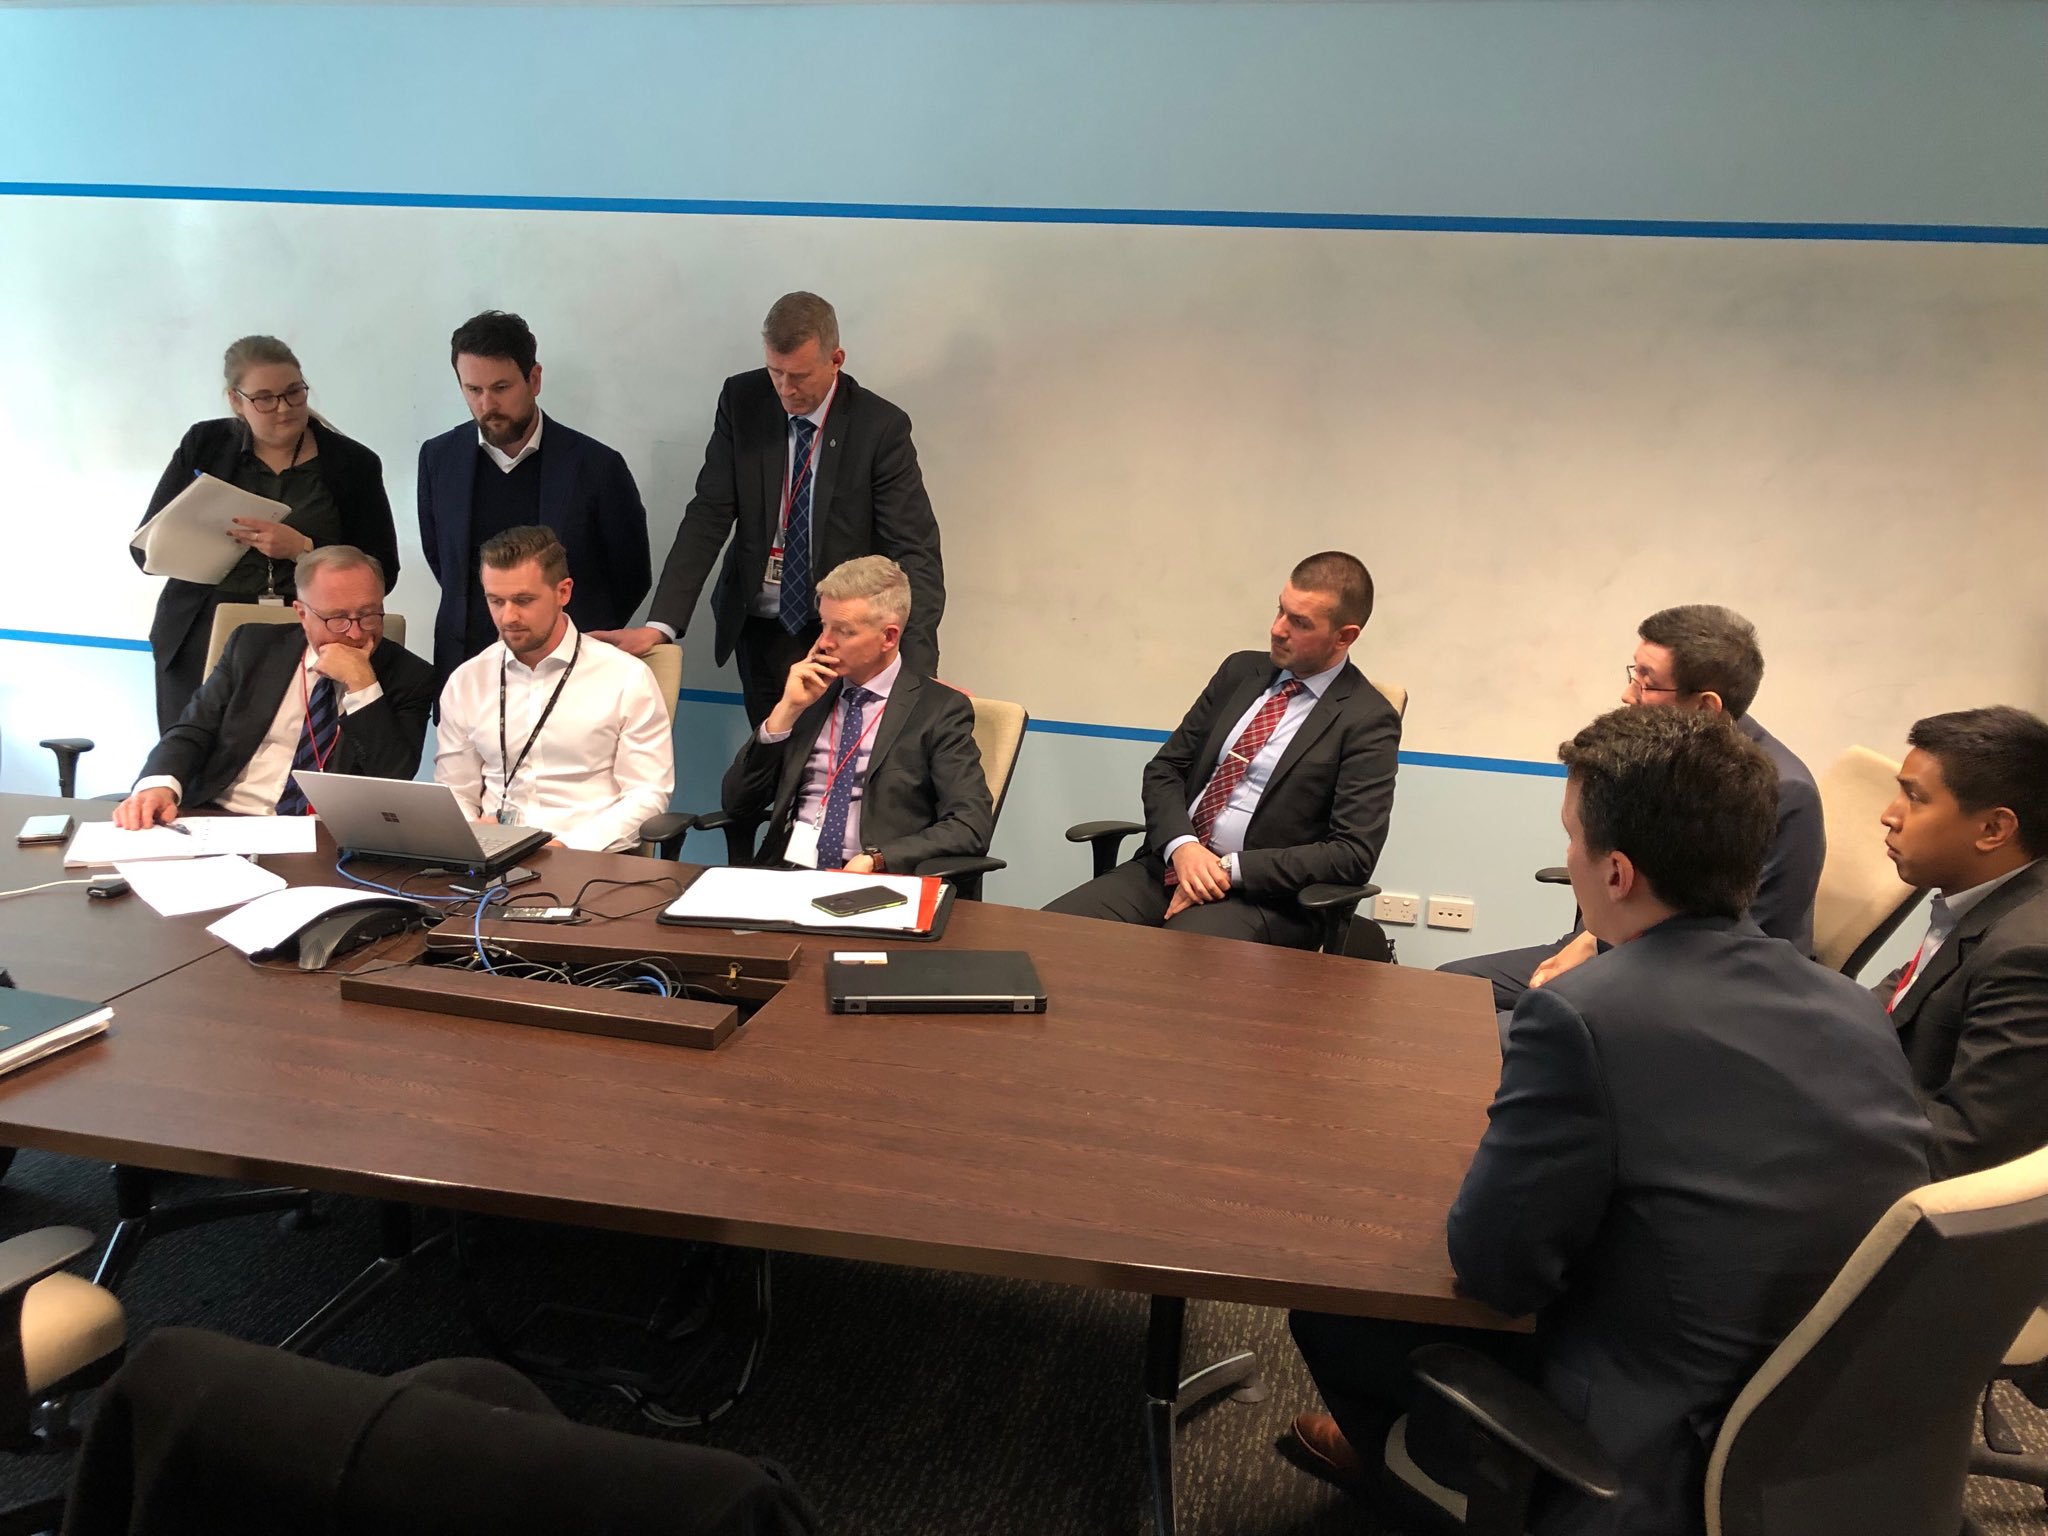 ABC lawyers and AFP officers hover over a computer as they work out what comes within the terms of the warrant. At the end of the table, on the right, are the  ... 				  </div>
			  
		  </div>

		</div>
		<!-- End K2 Item Layout -->

				
									
																	
														
																
						
									
						
		<!-- Start K2 Item Layout -->
		<div class=